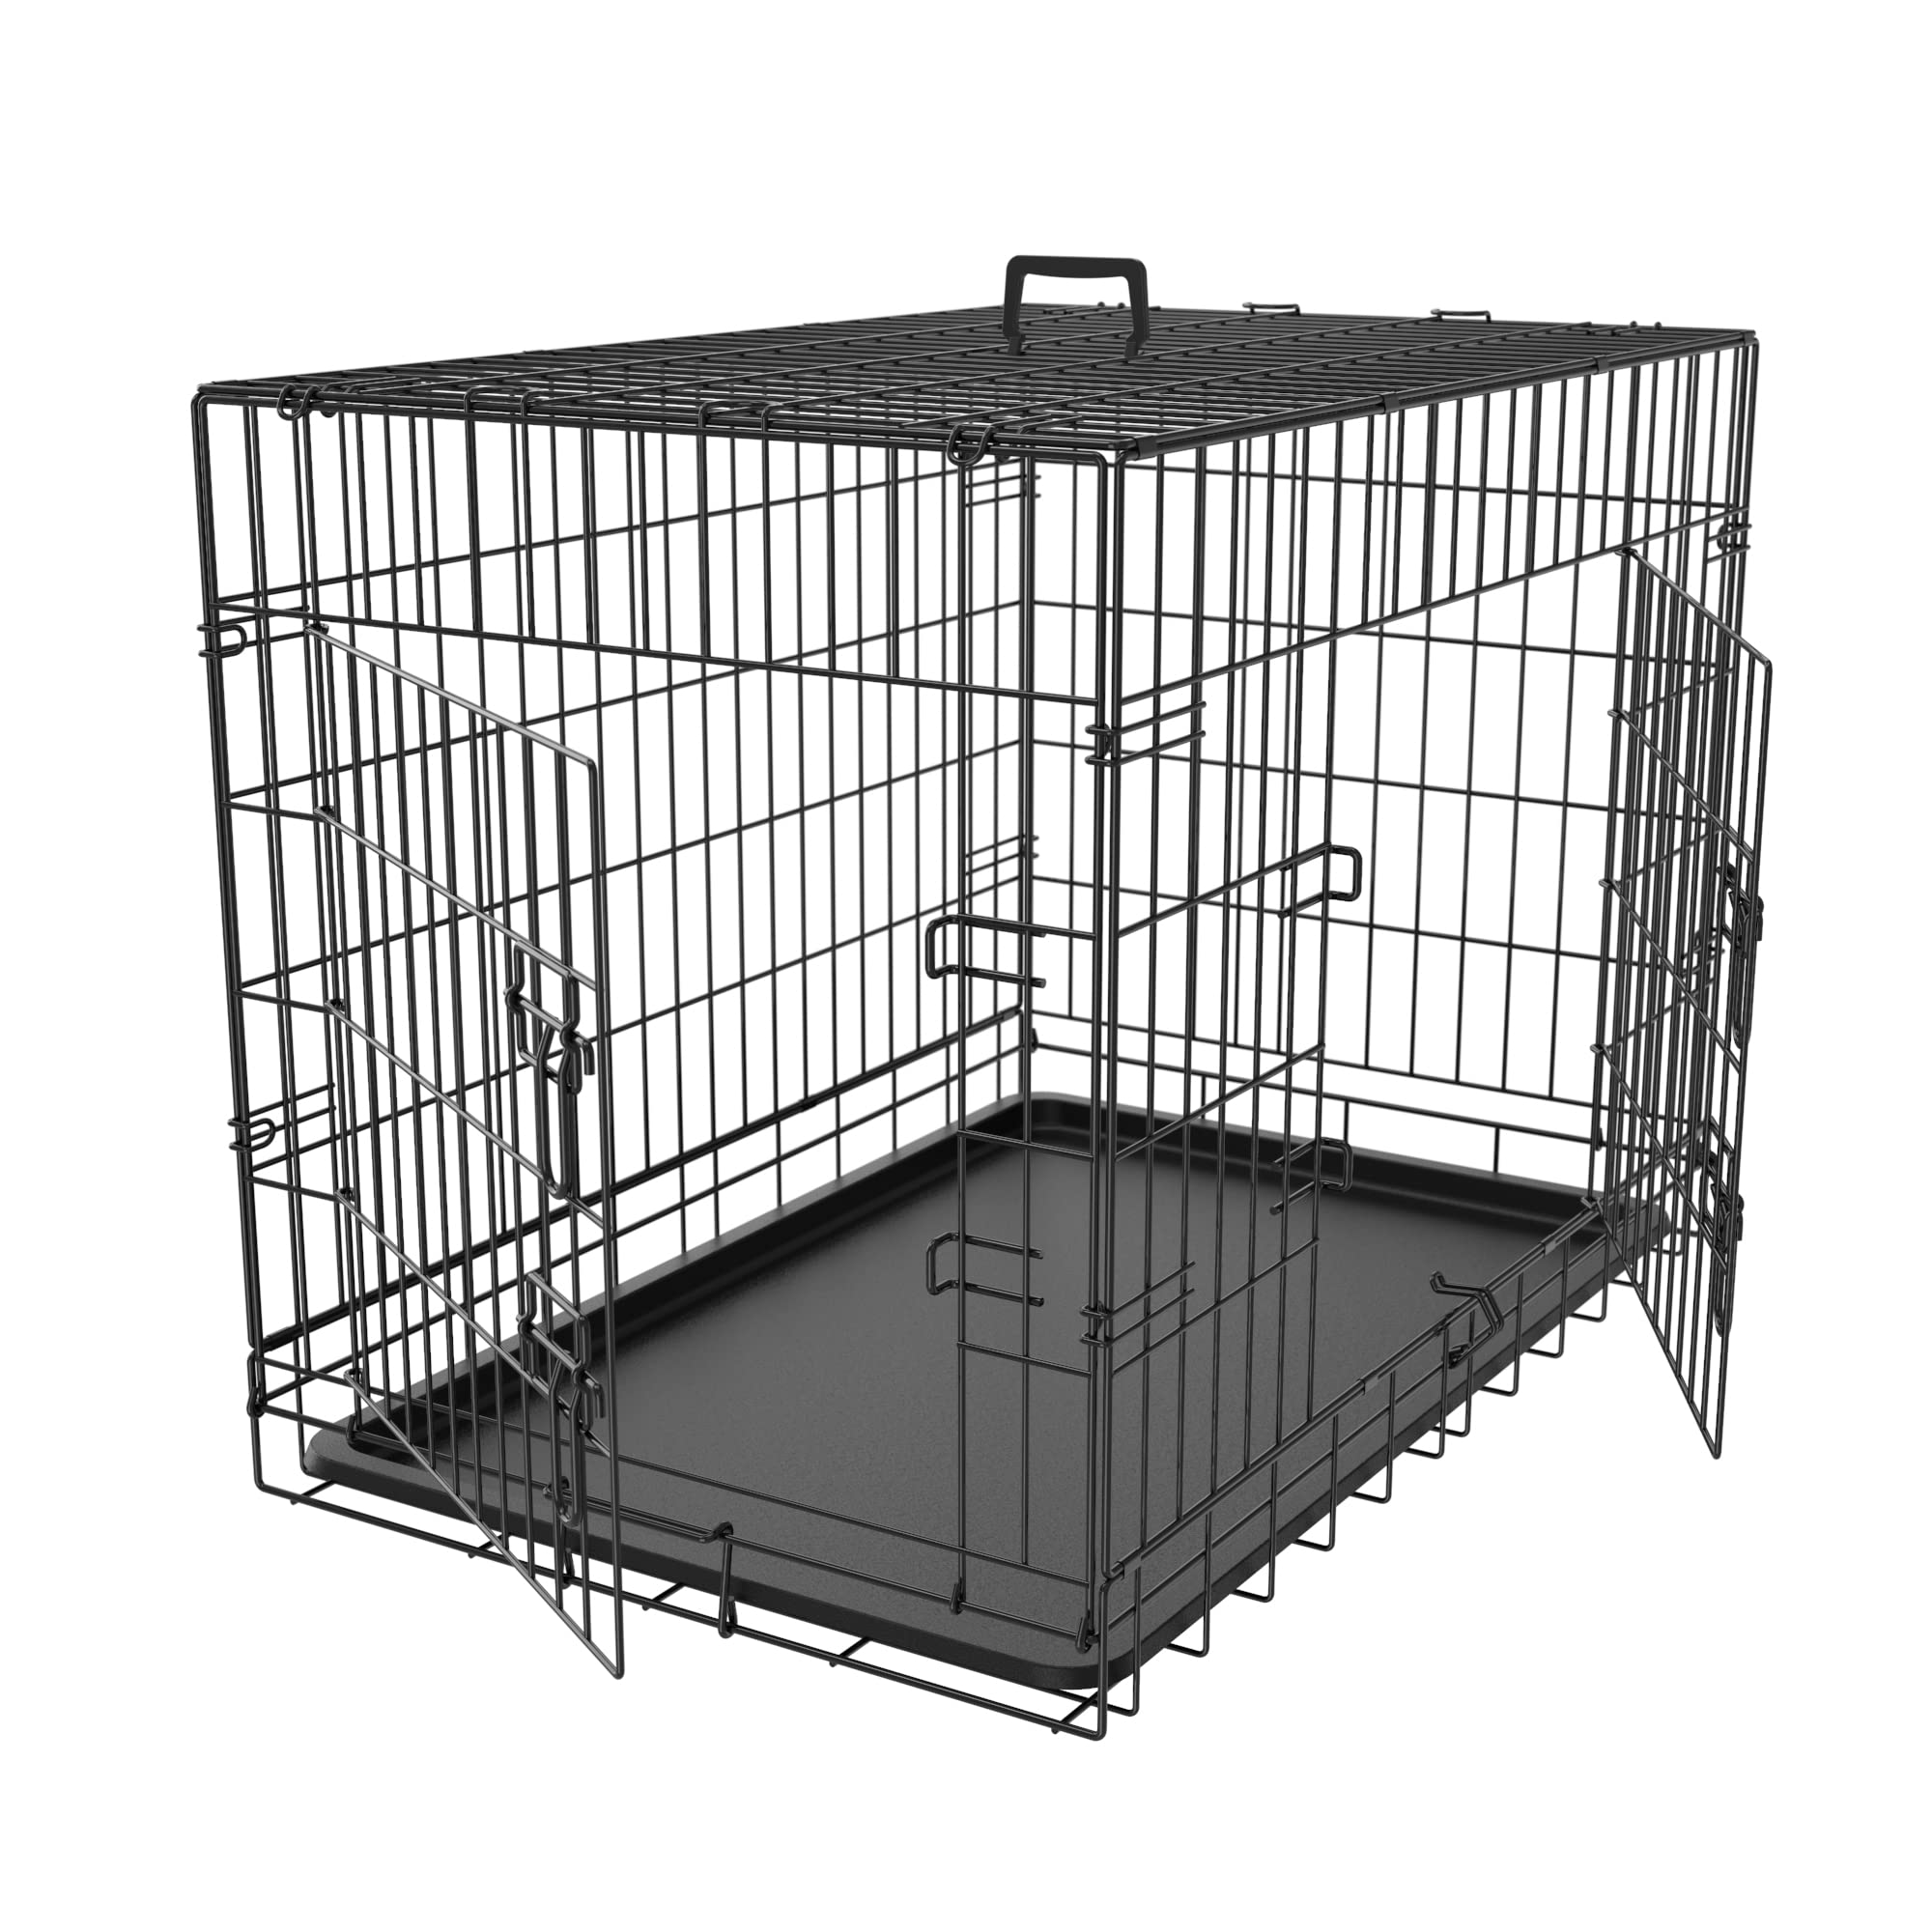 Pet Republic 303642Inches Double Door Dog Crate Folding Metal Wire Dog Kennel Cage With Tray For Smallmediumlarge Dogs Indoor Outdoor Travel